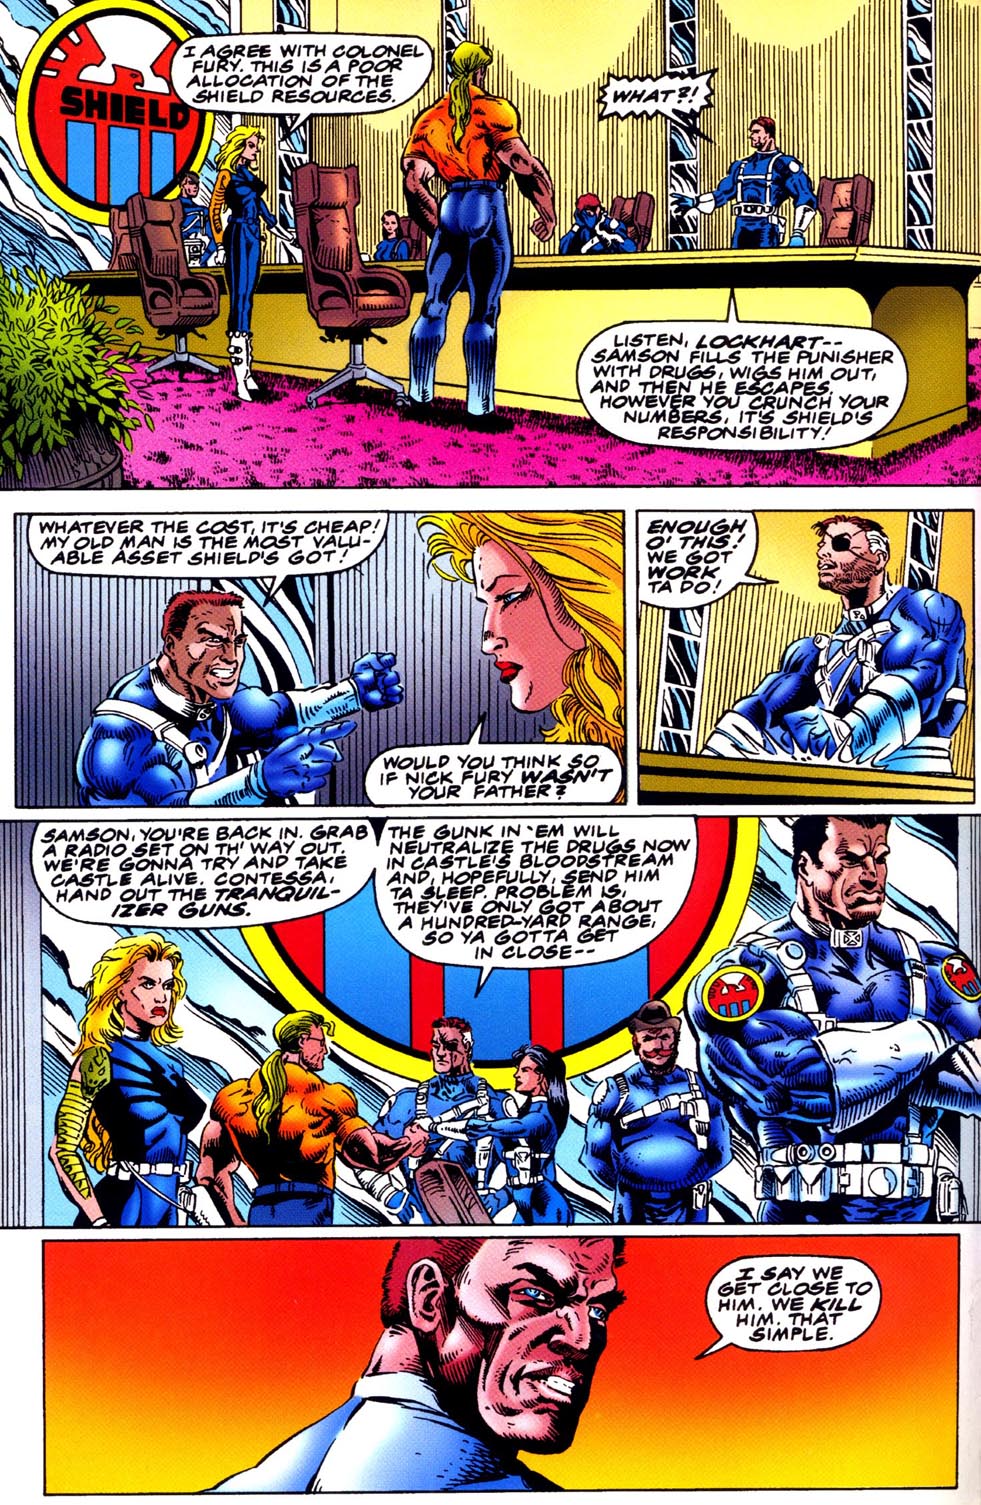 Read online Double Edge comic -  Issue # Issue Omega - 11